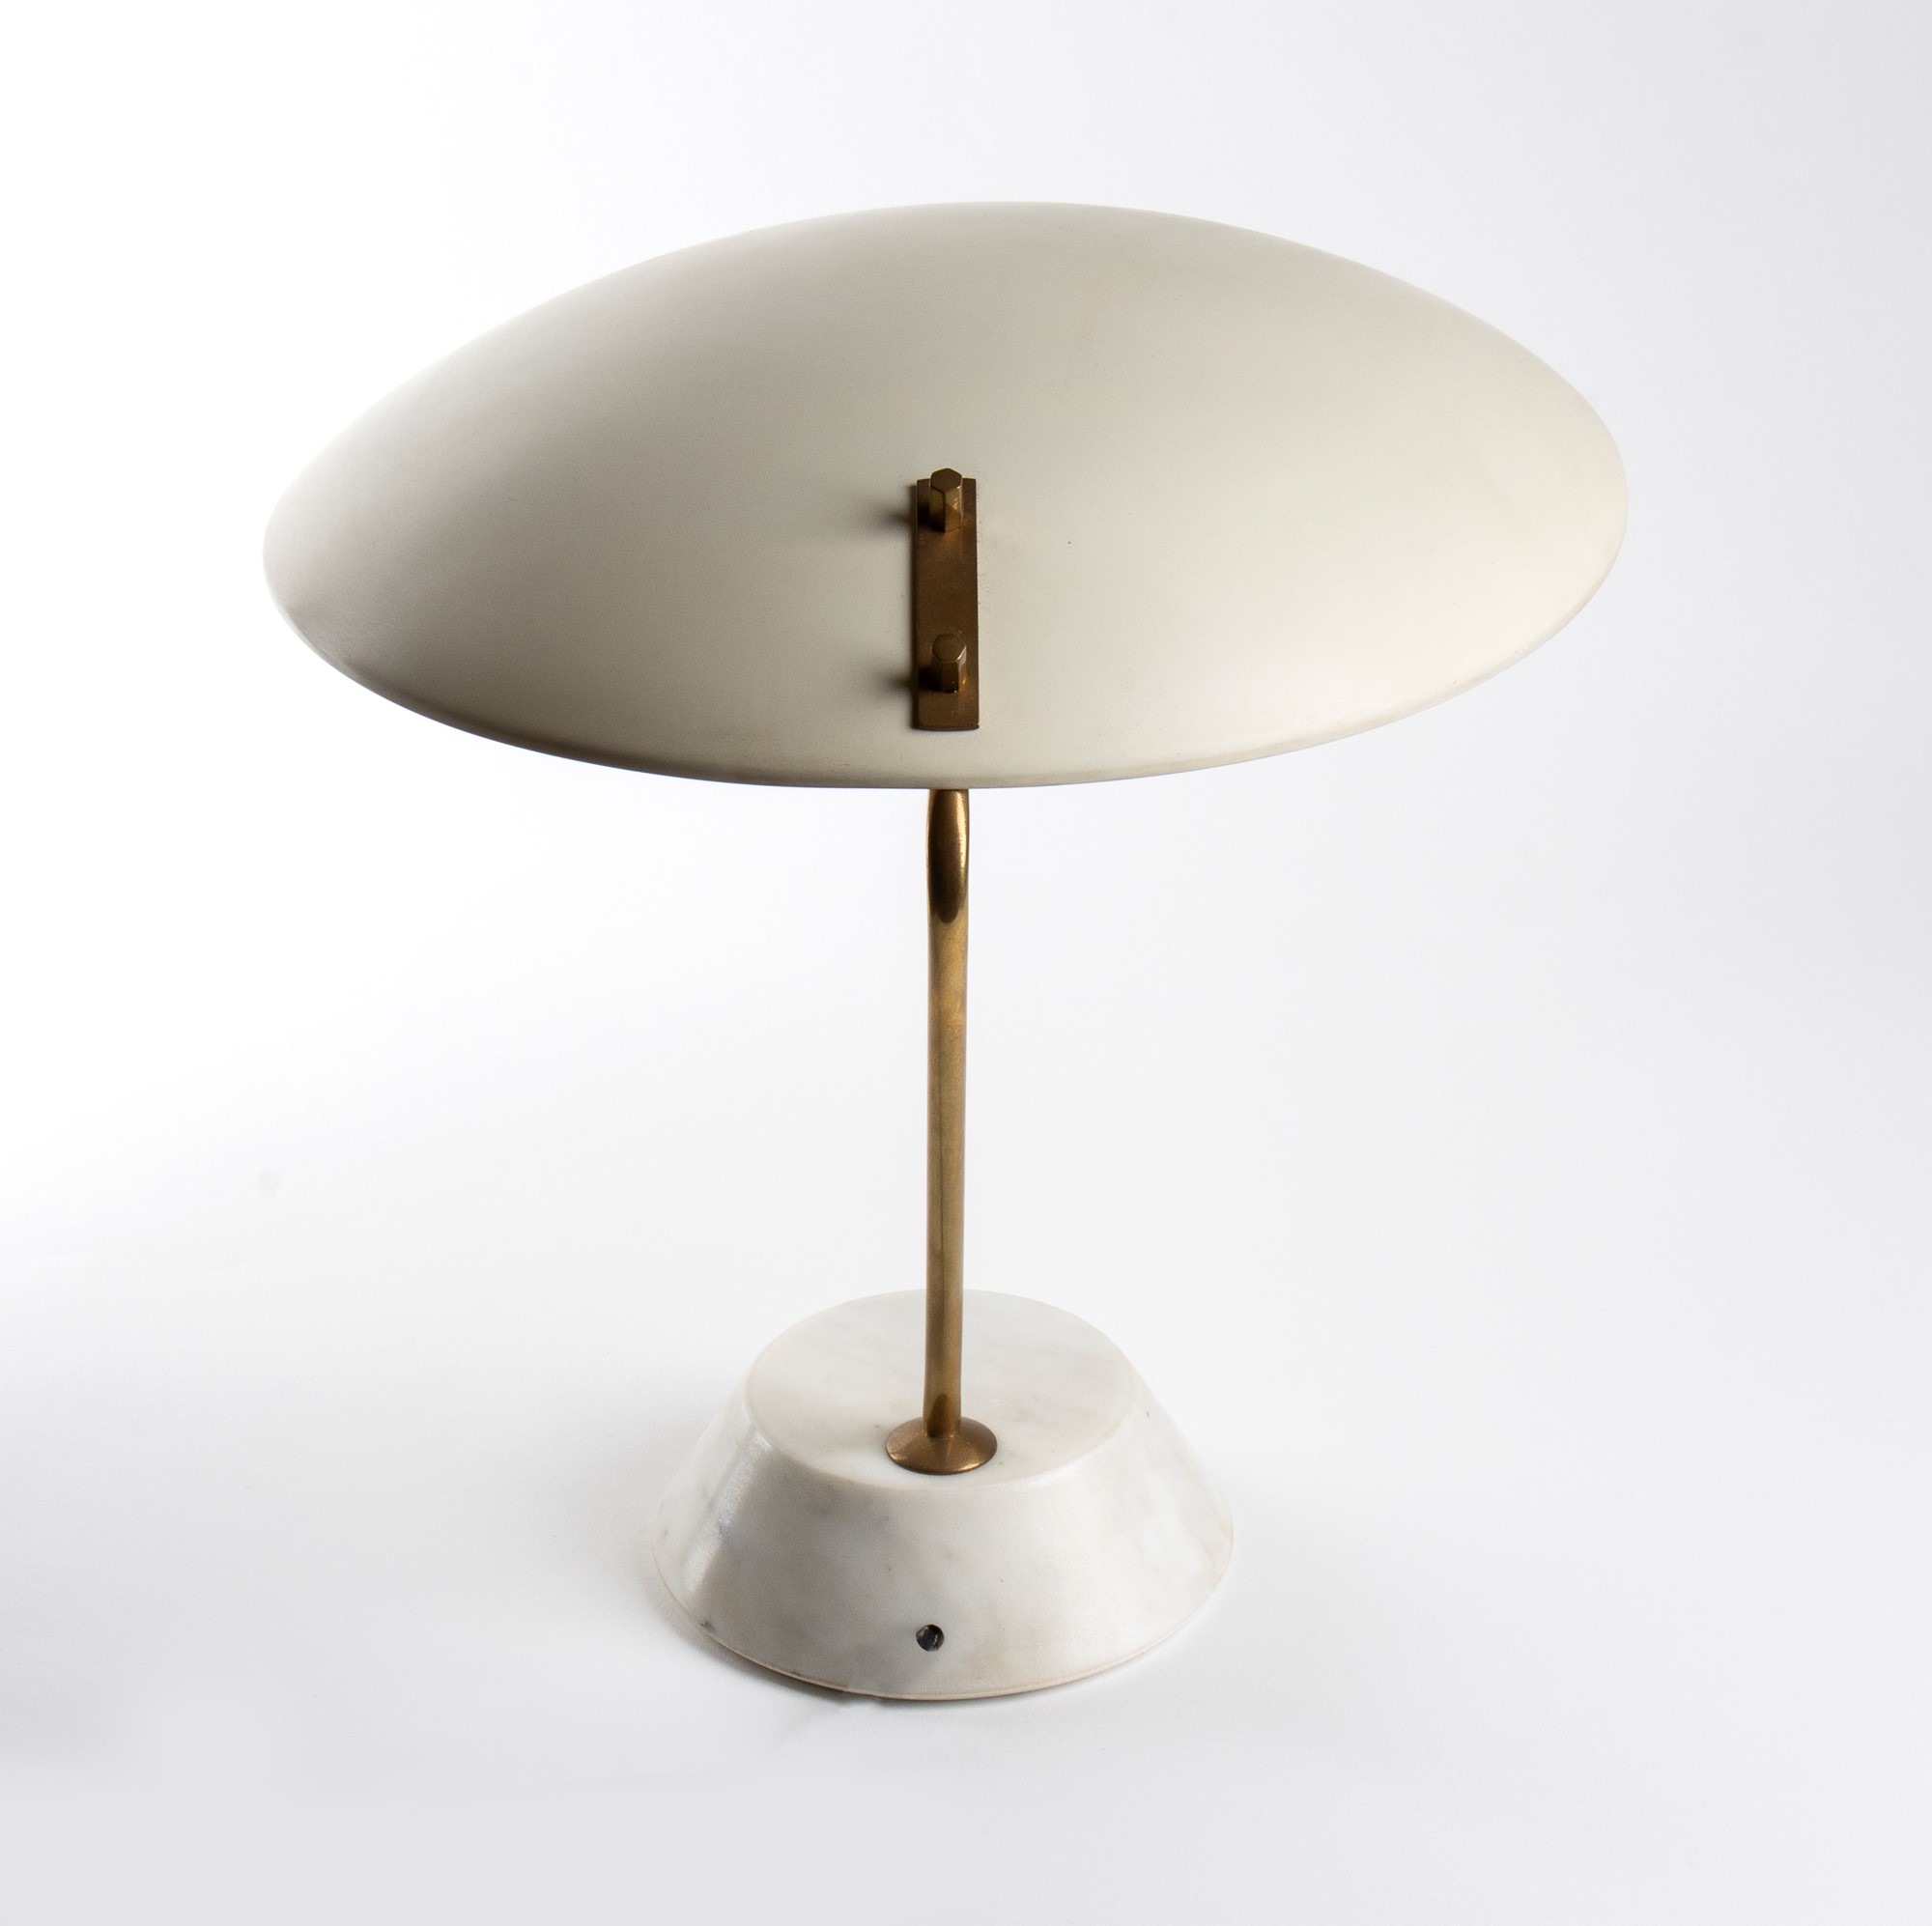 Bruno Gatta Table lamp model 8023 with a light. Cream white metal diffuser, brass stem and marble c - Image 8 of 19